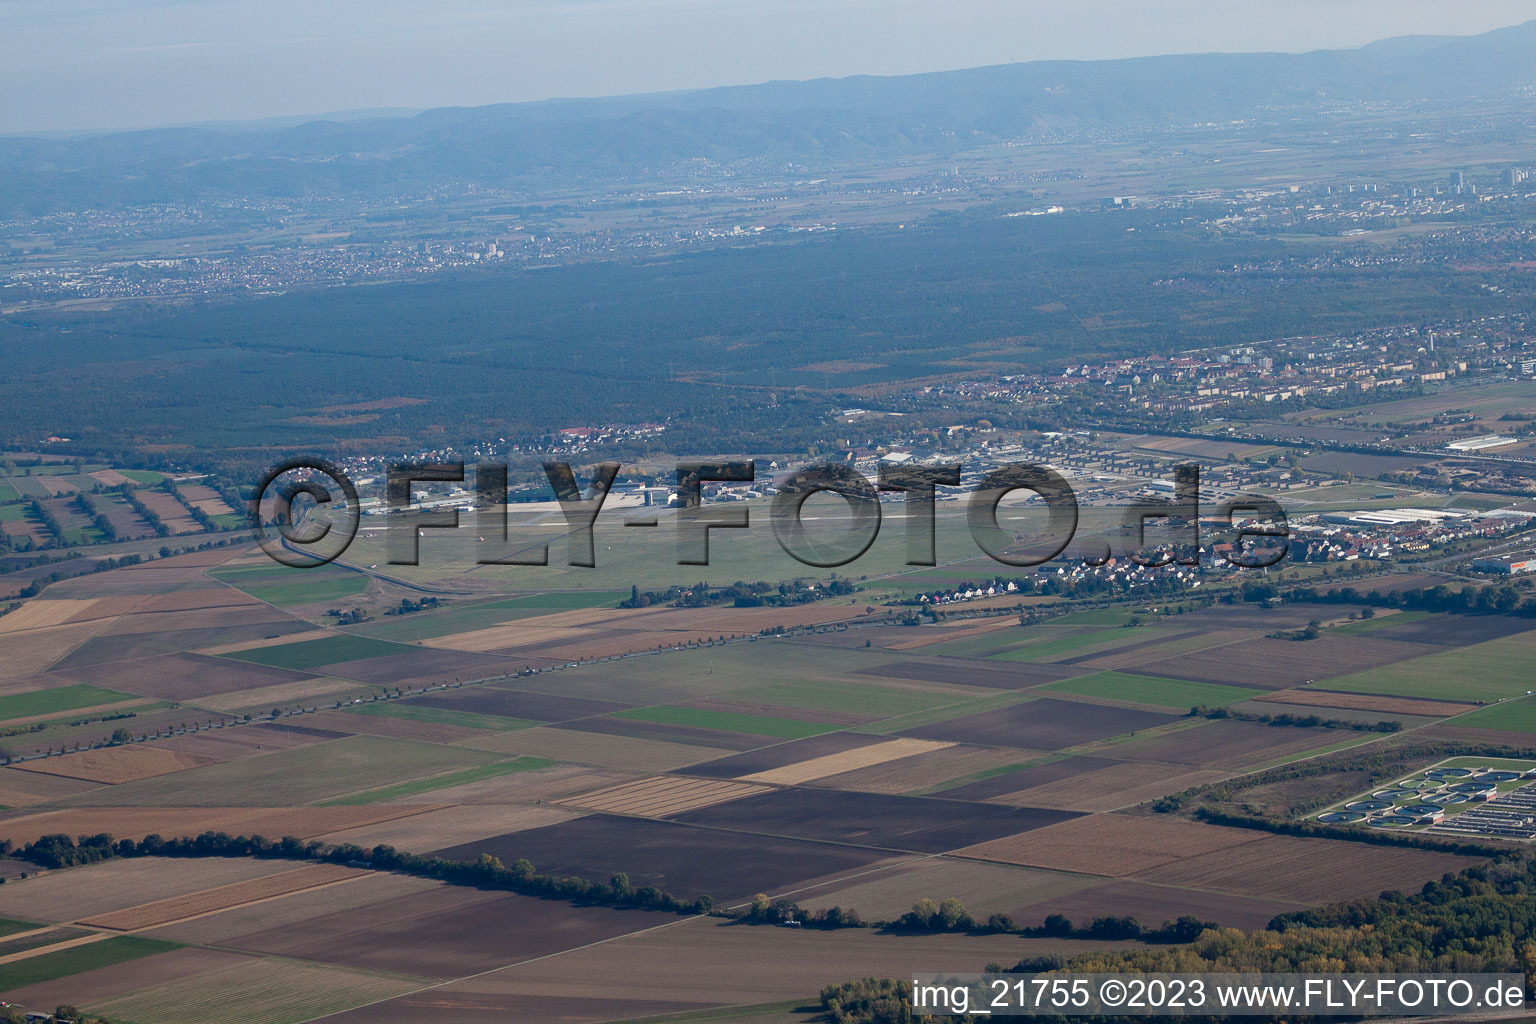 Coleman Airfield in the district Sandhofen in Mannheim in the state Baden-Wuerttemberg, Germany